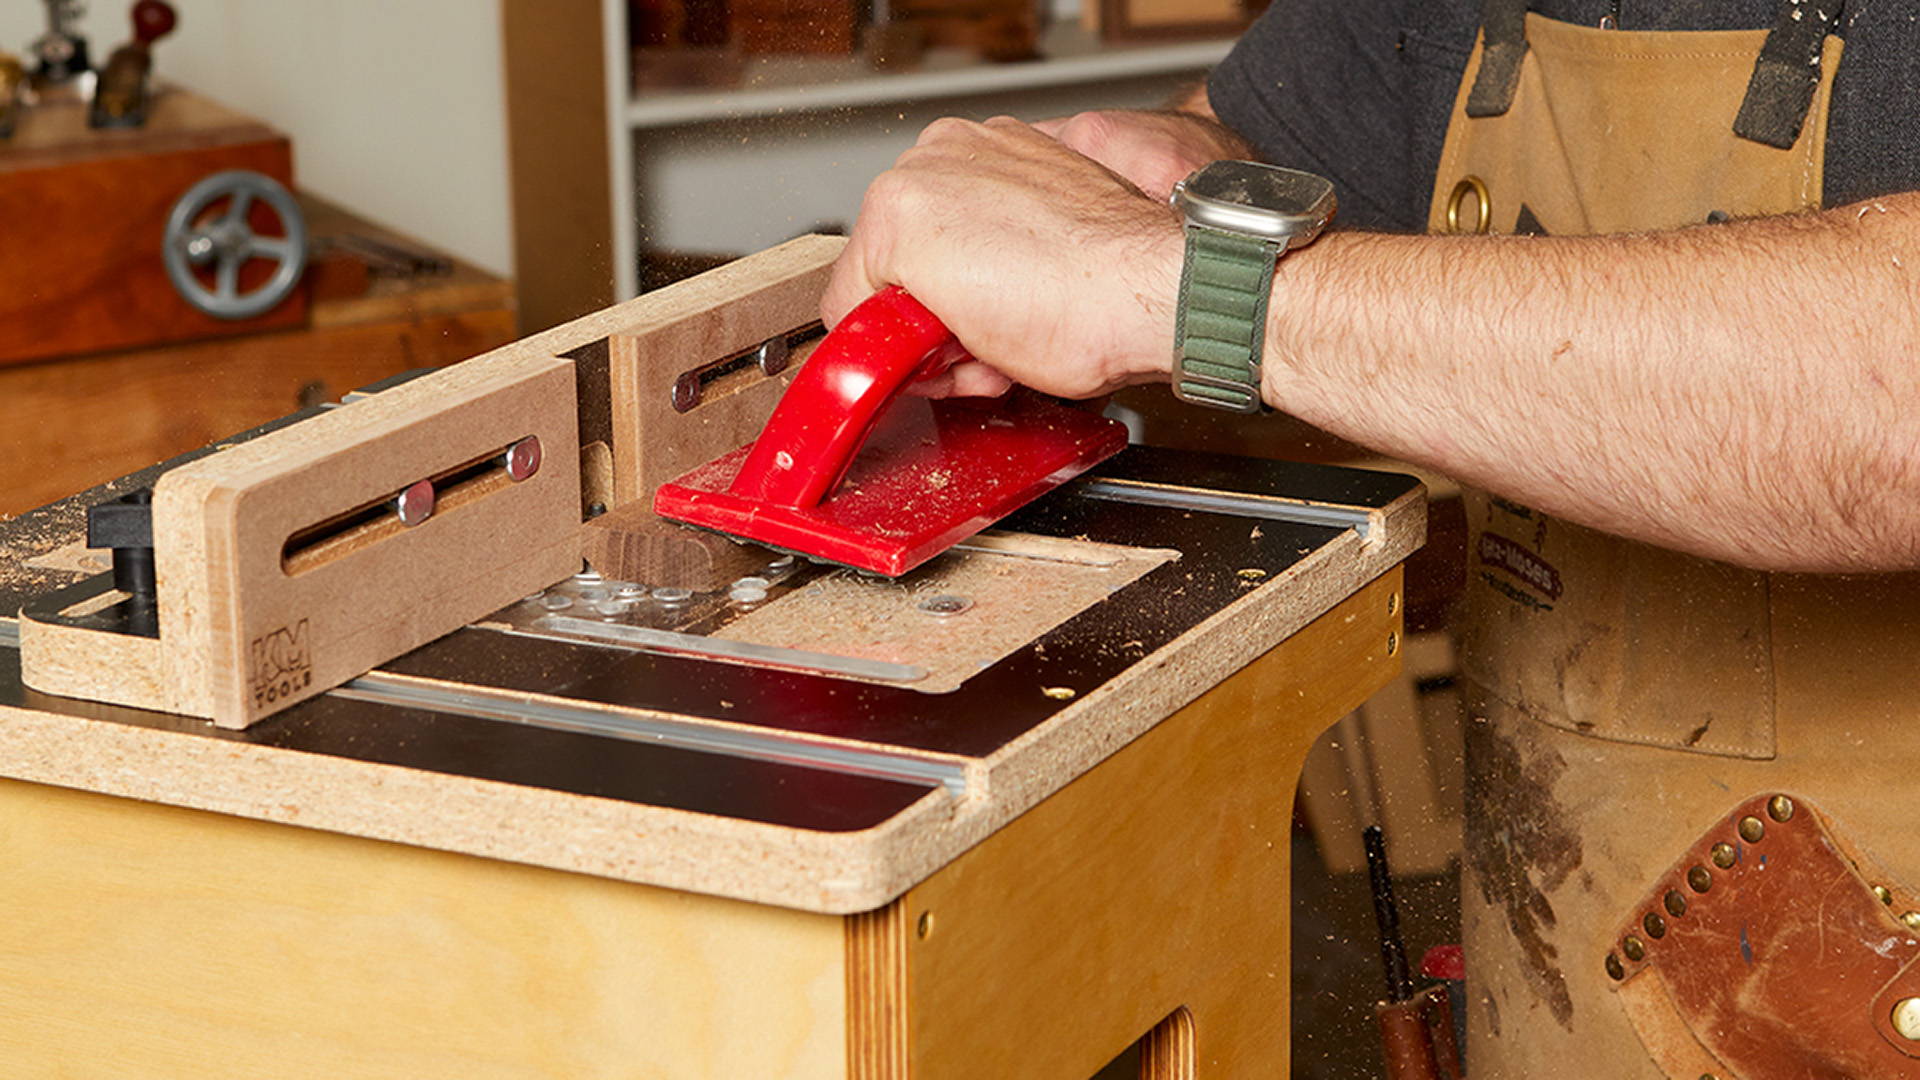 Router Table 101: Intro to One of the Shop's Most Versatile Tools